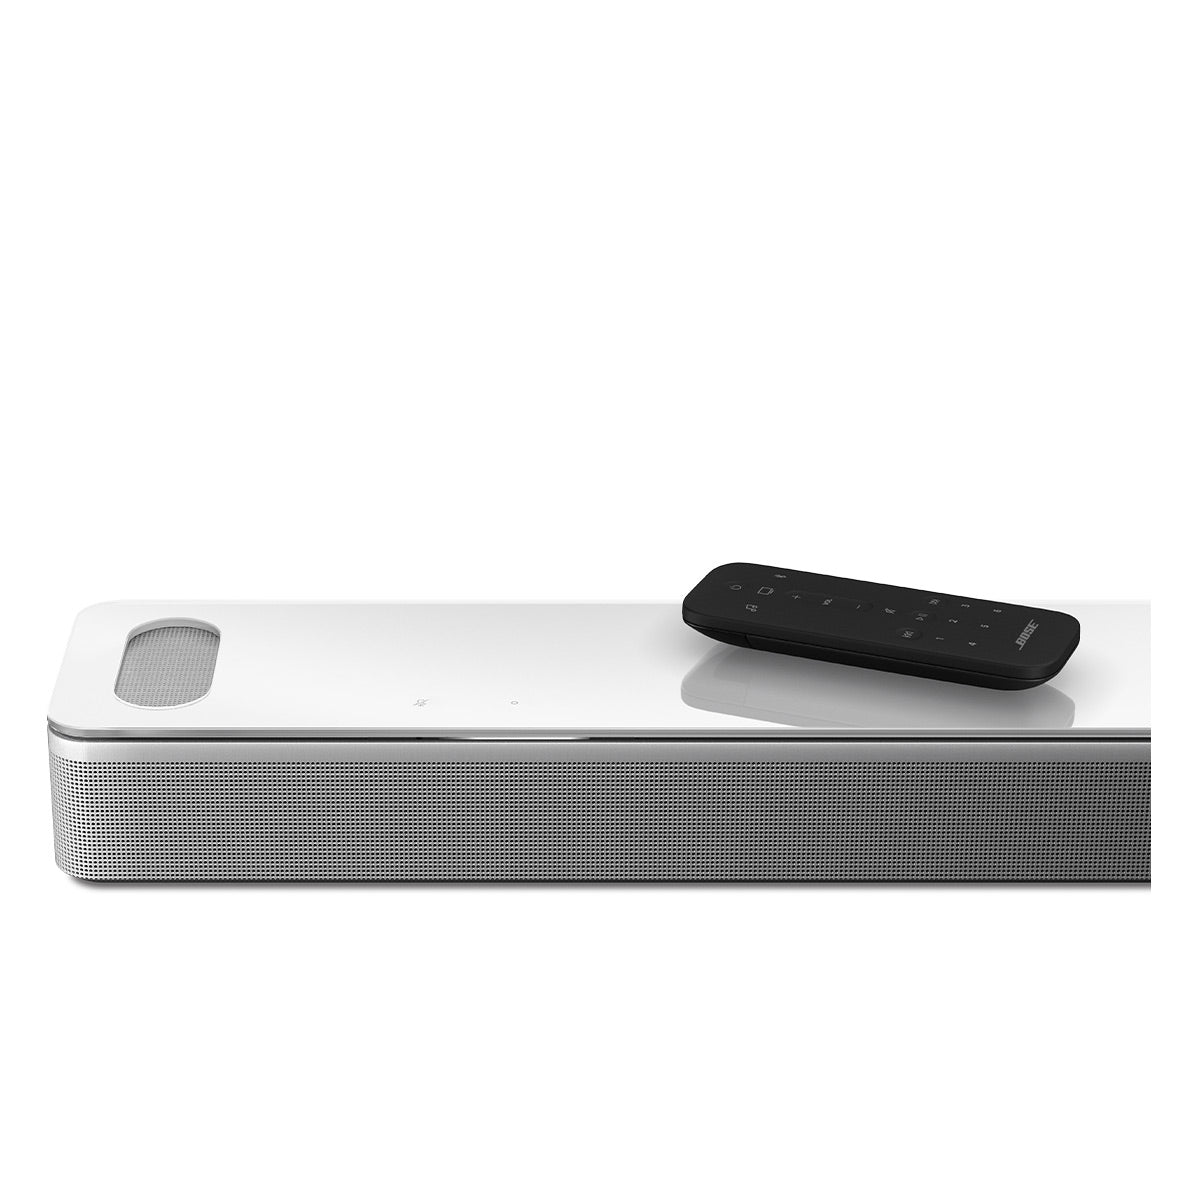 | Stereo (White) 900 700 World Module Bass with Wide Subwoofer Home Theater Bose Soundbar System